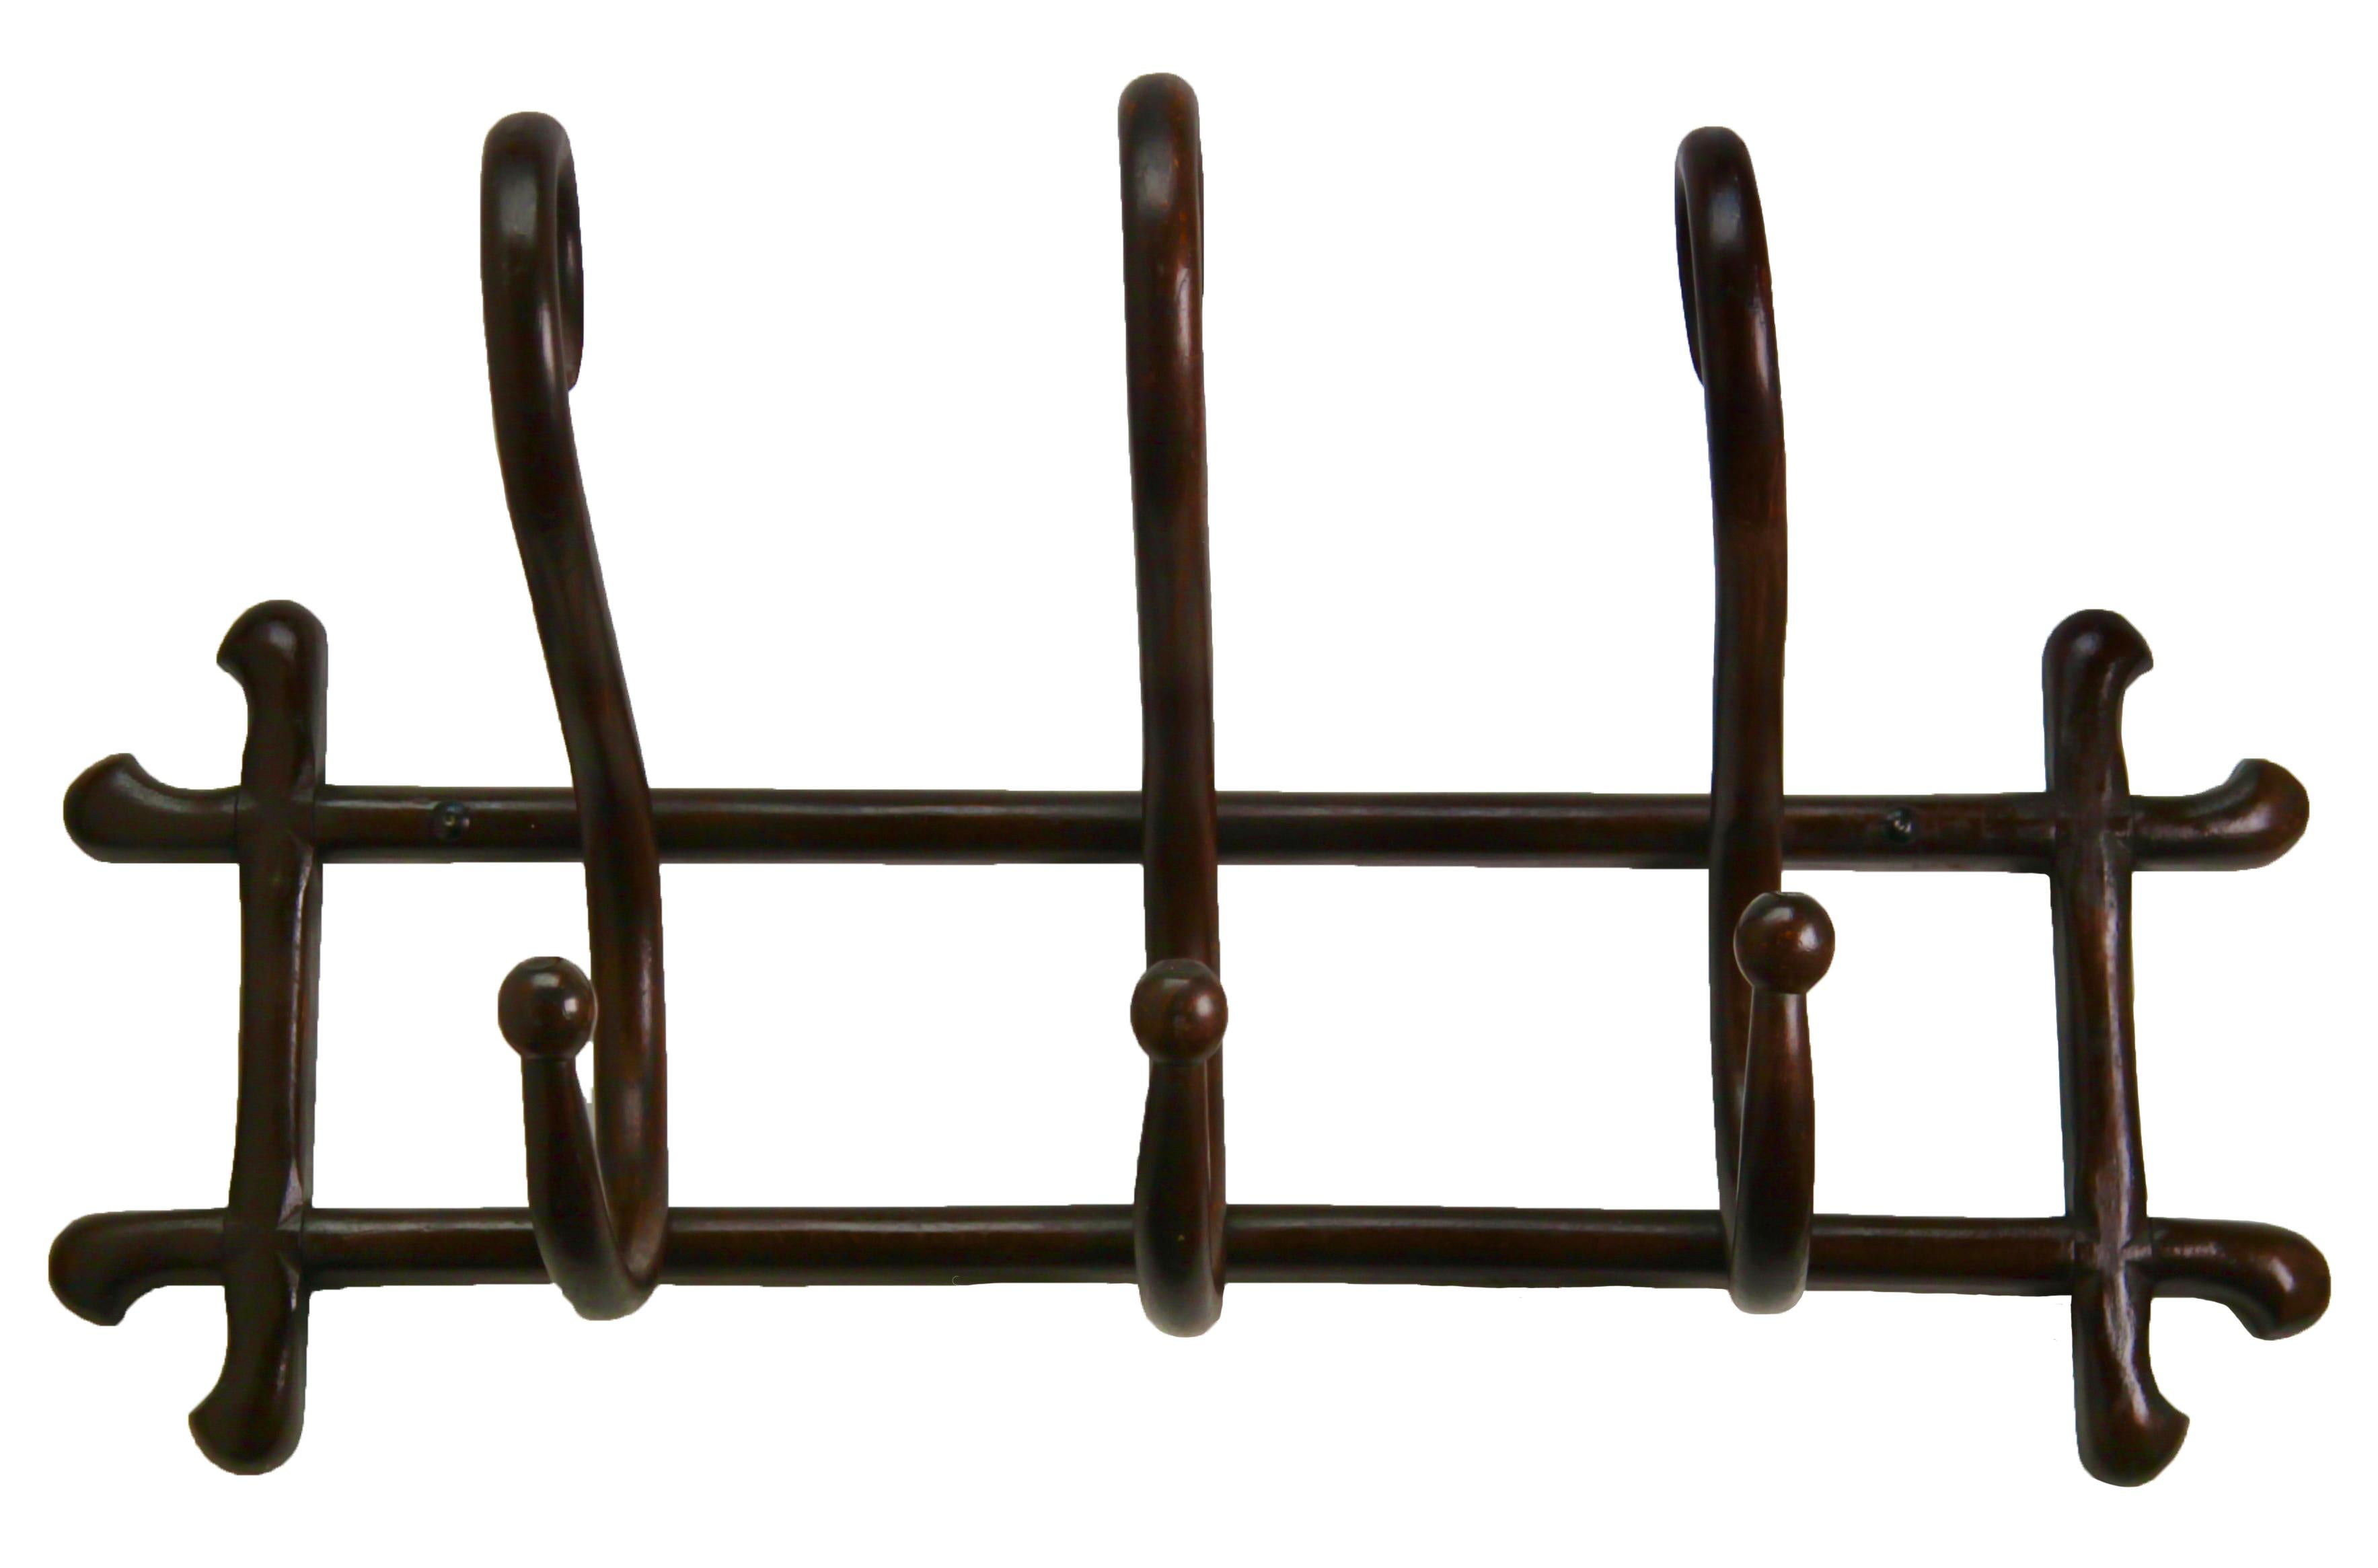 Hand-Crafted Art Nouveau Bentwood Wall Coat Rack Thonet Vienna, 1879-1887